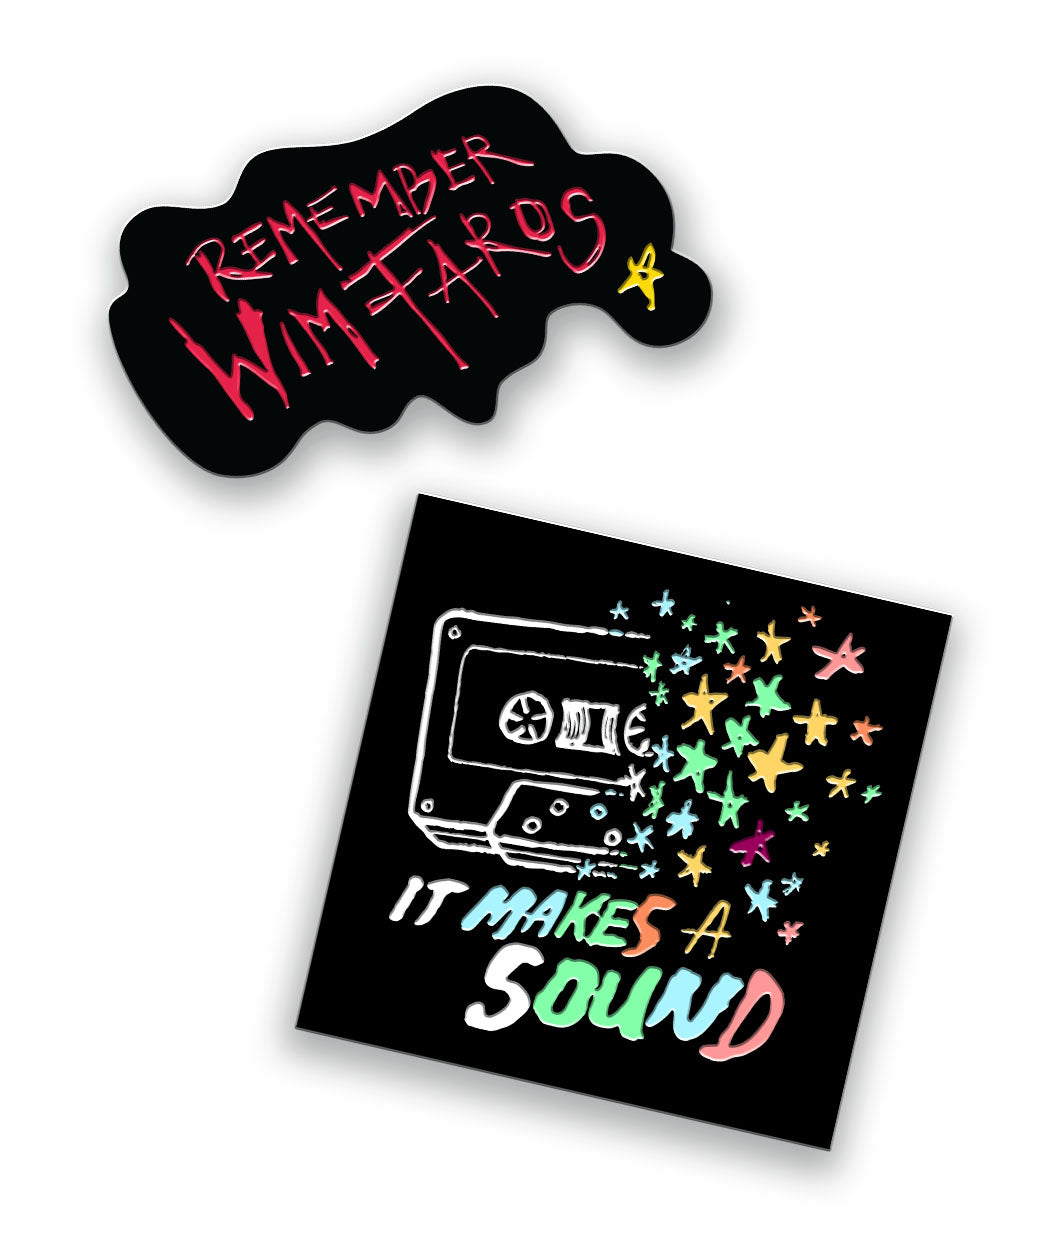 Two detached black pins. One pin with a cassette tape dissolving into colorful stars. The words 